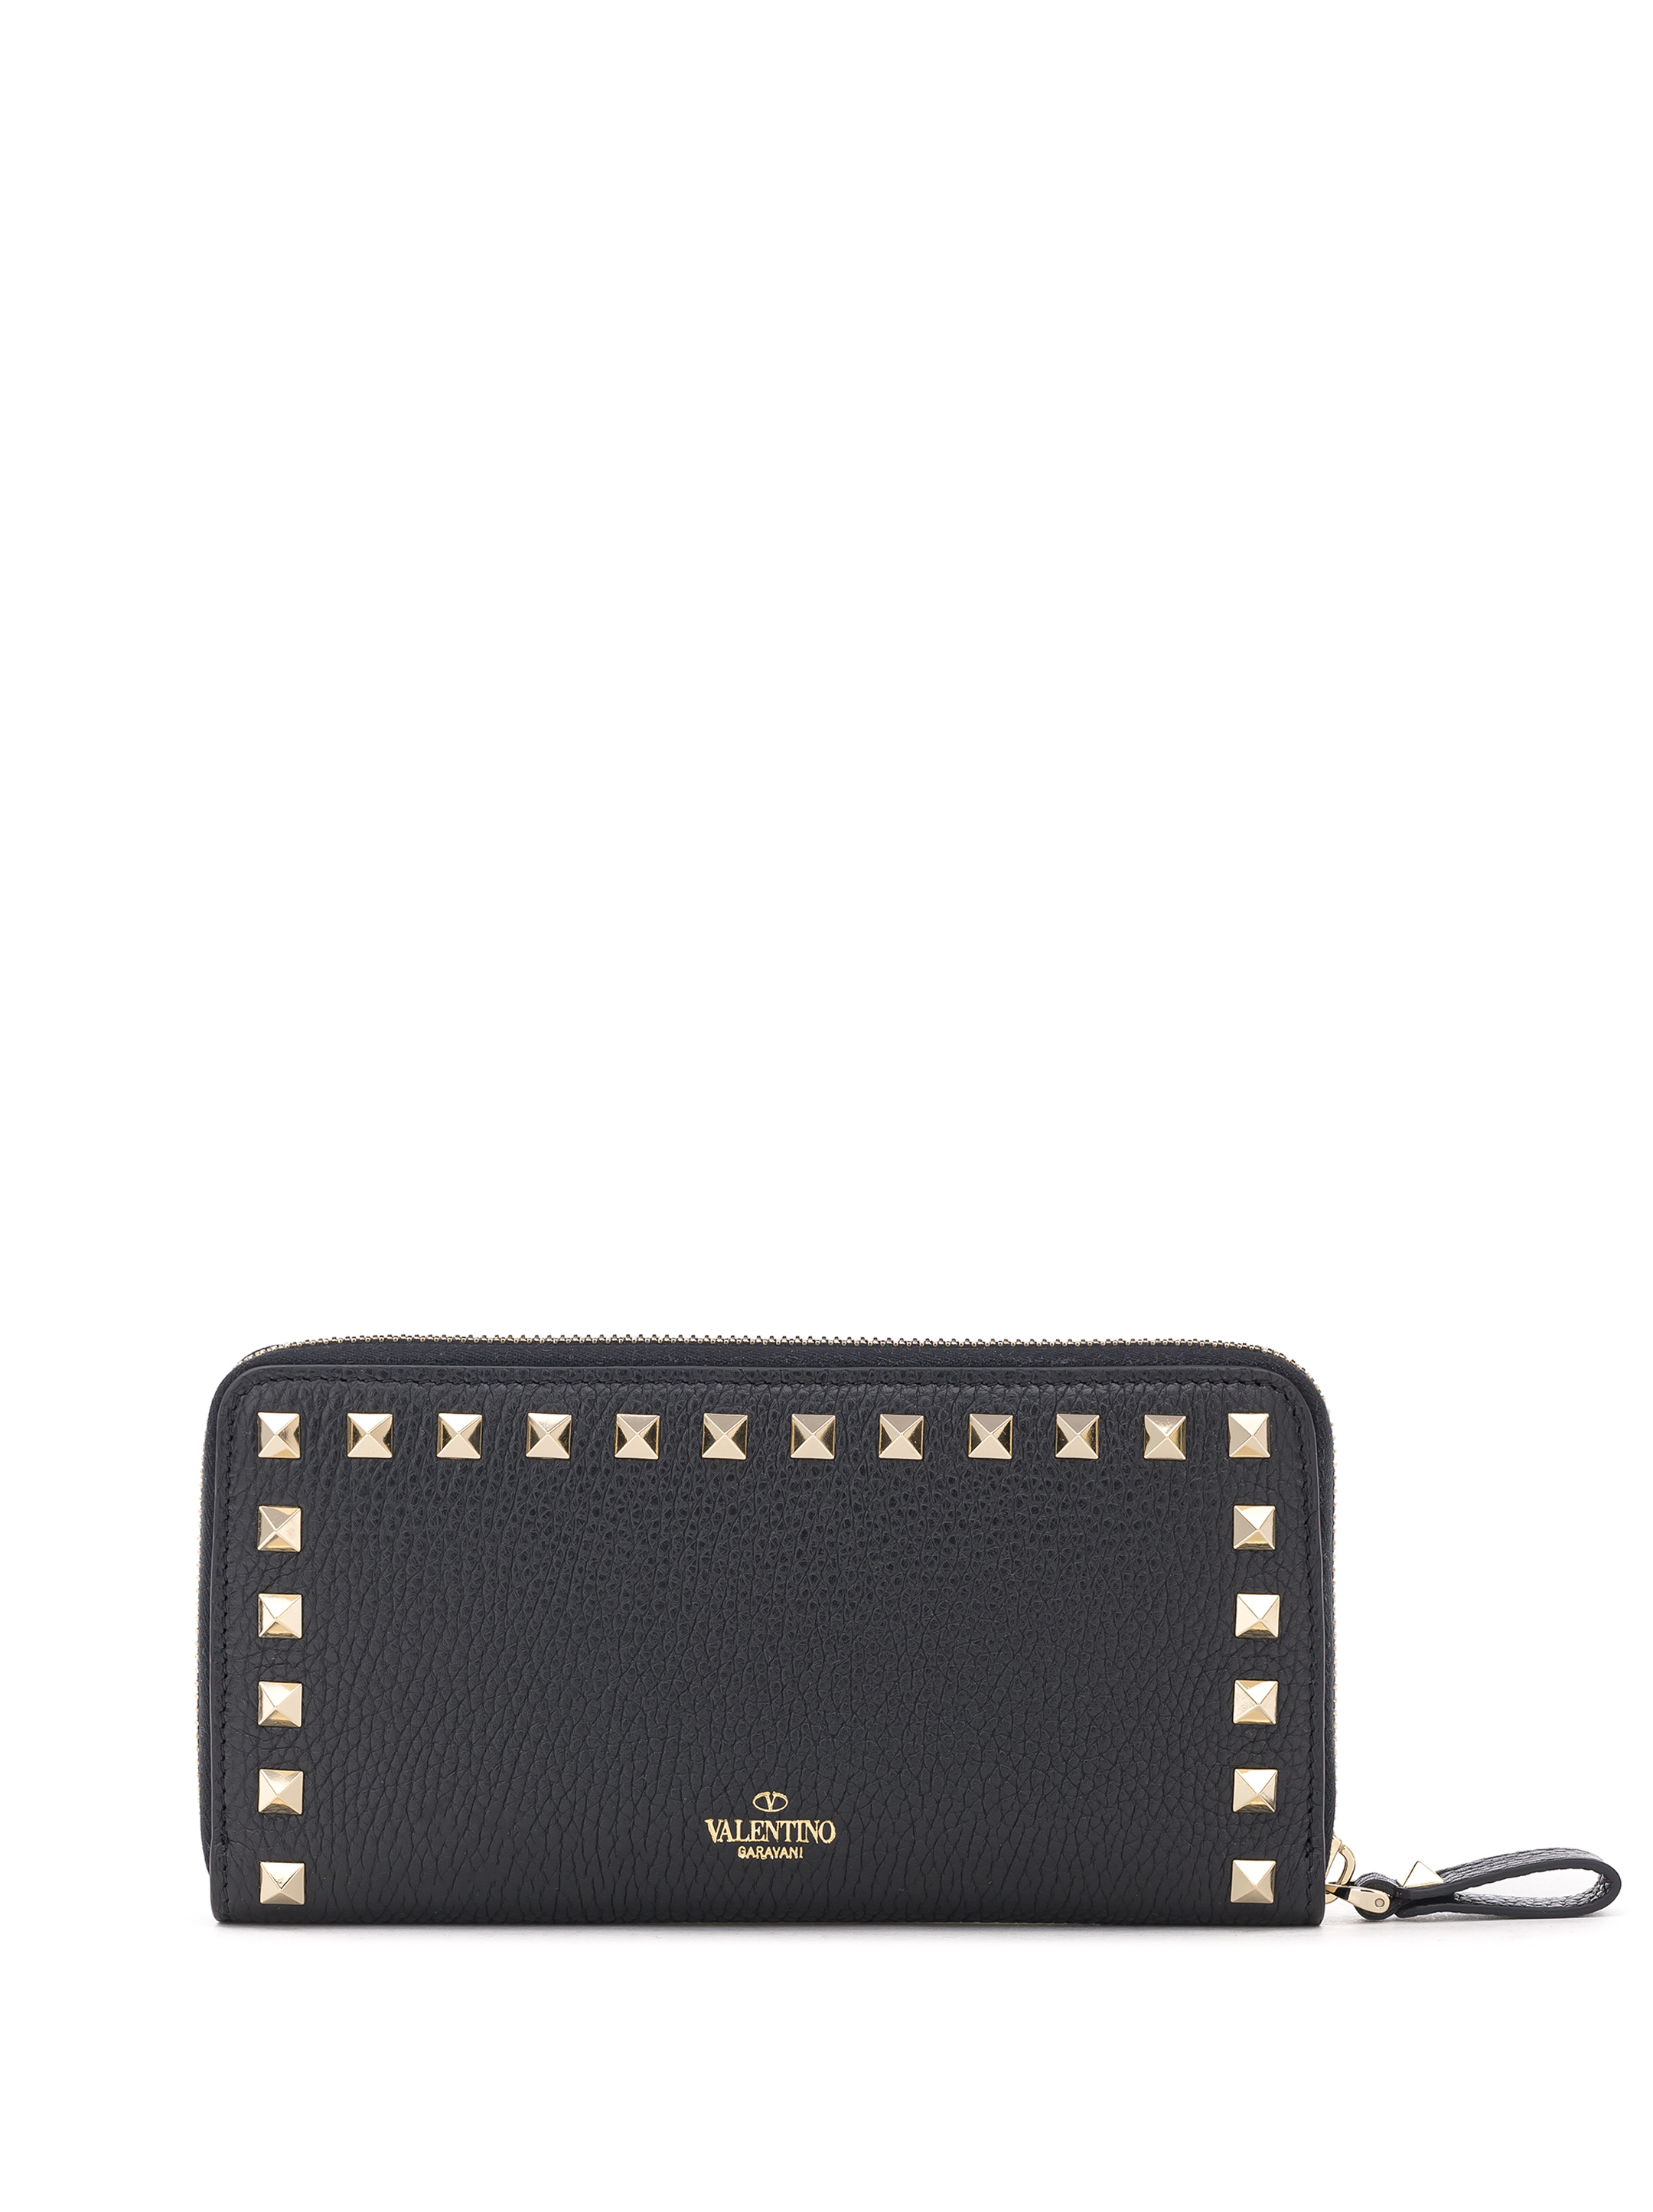 Valentino women's Rockstud leather wallet - buy for 257200 KZT the official Viled online store, art. 1W2P0645VSH.0NO_U_222_2